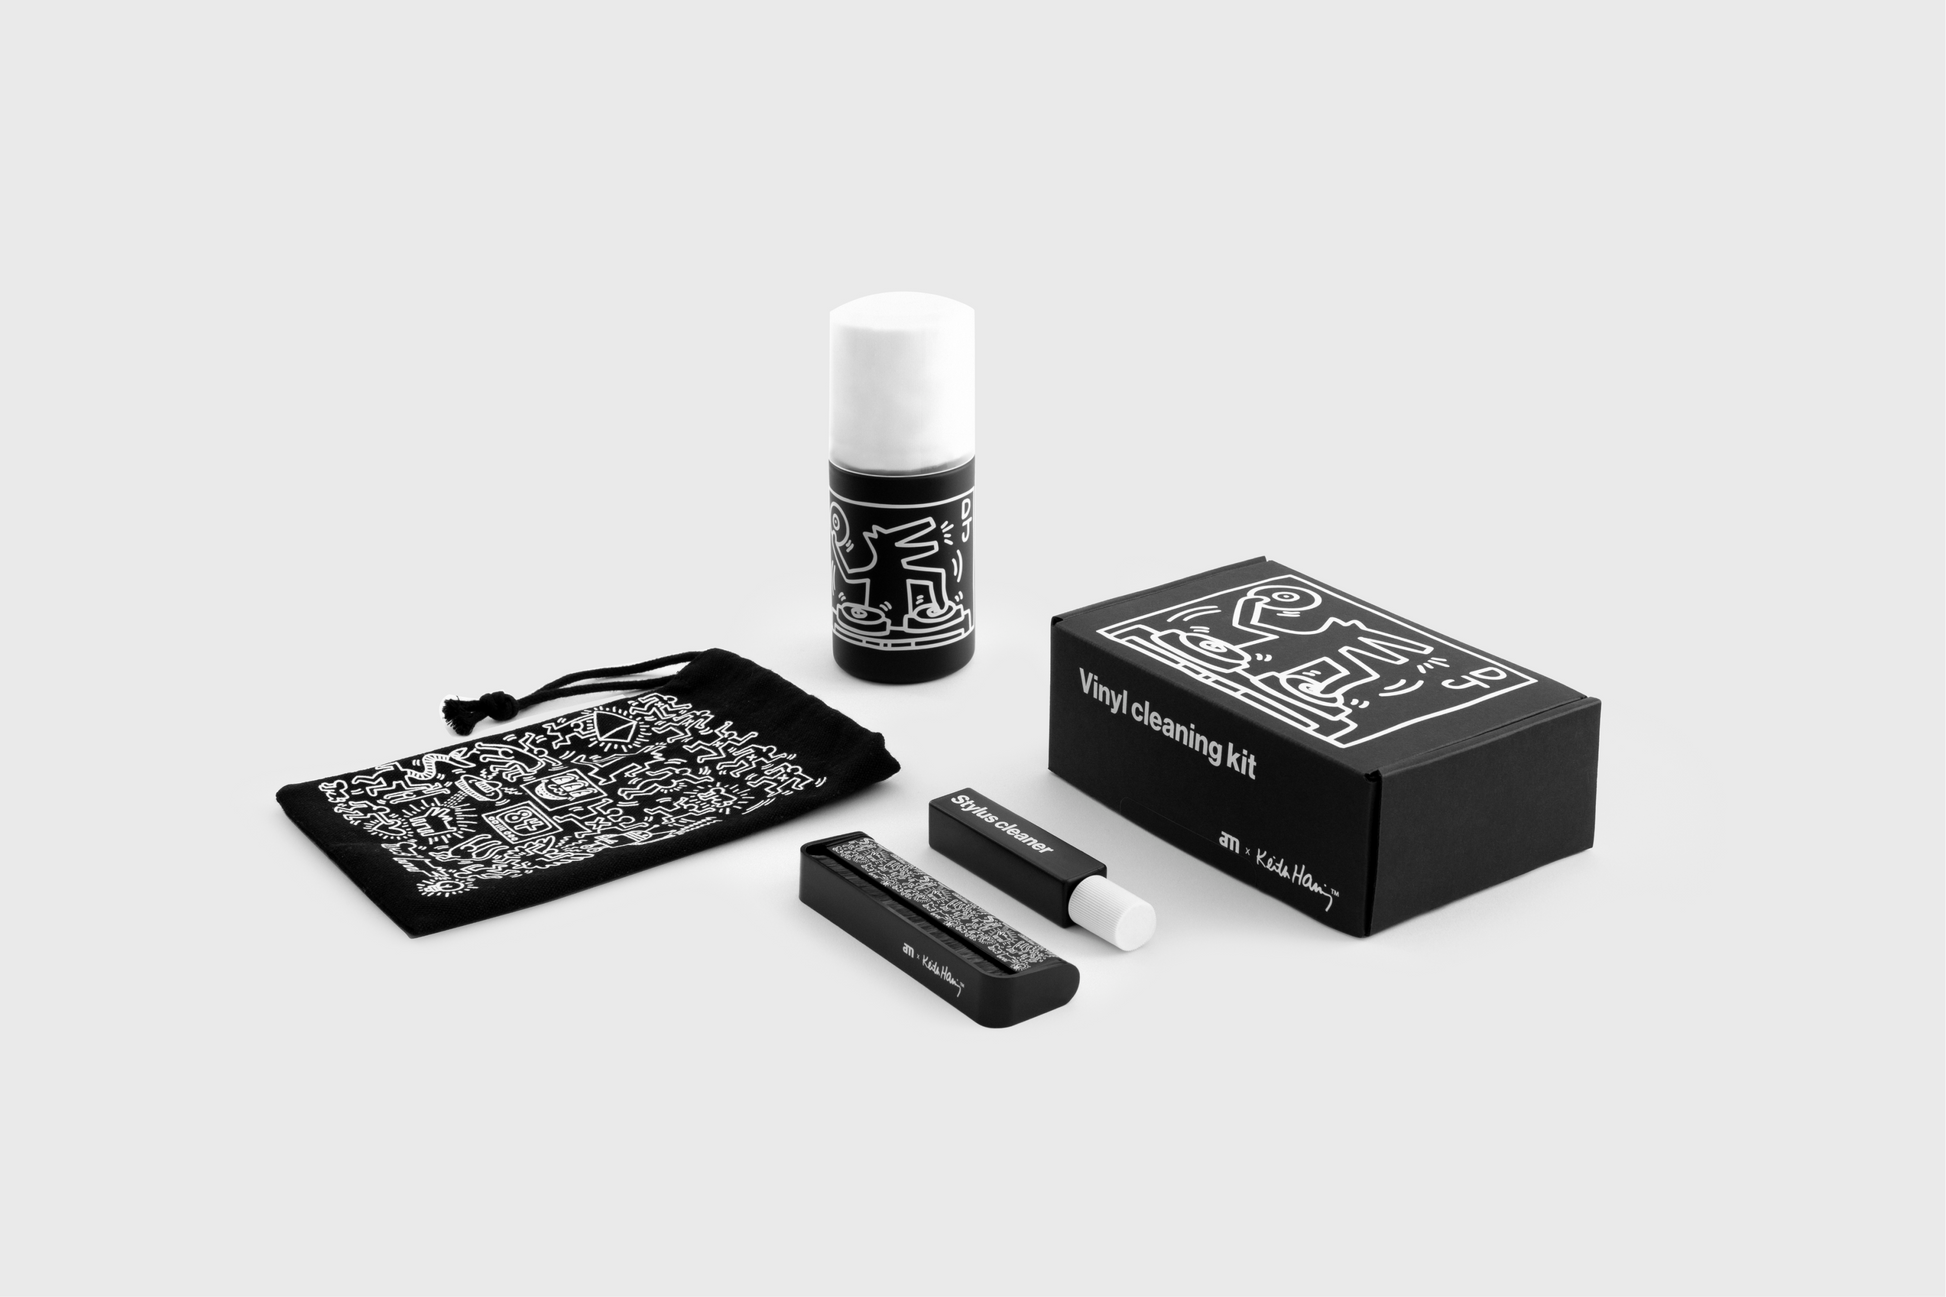 AM Vinyl Cleaning Kit by Keith Harring-Turntable Accessories-AM-PremiumHIFI